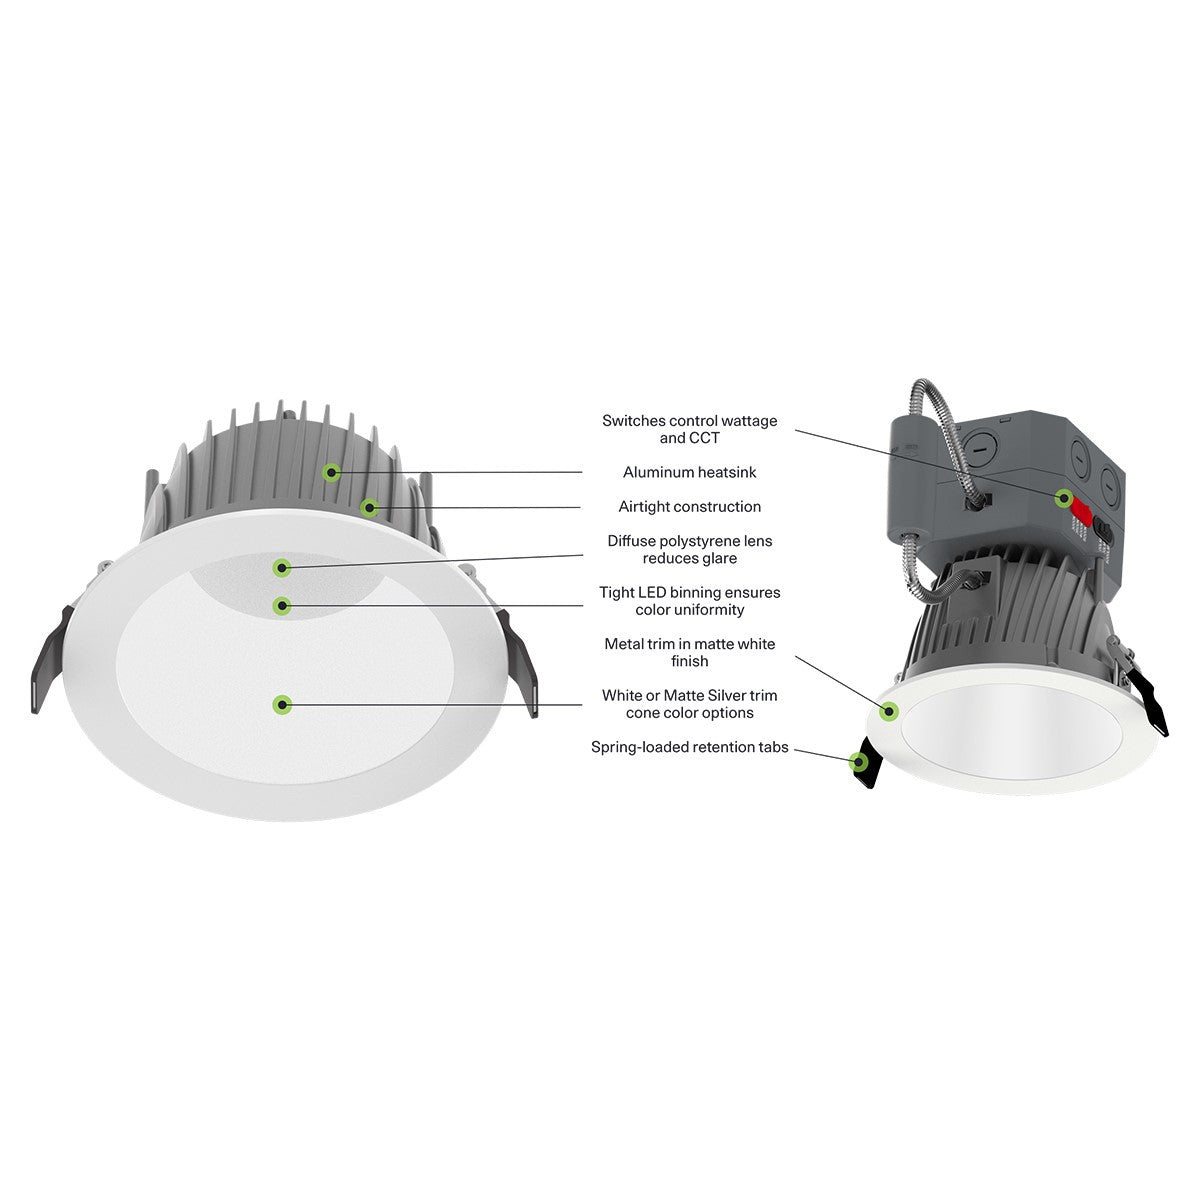 6 Inch LED Deep Regress Commercial Downlight, Field Adjustable 12/18/24W, 1000/1500/2000 Lumens, 30/35/40/50K, Smooth Trim, White Finish